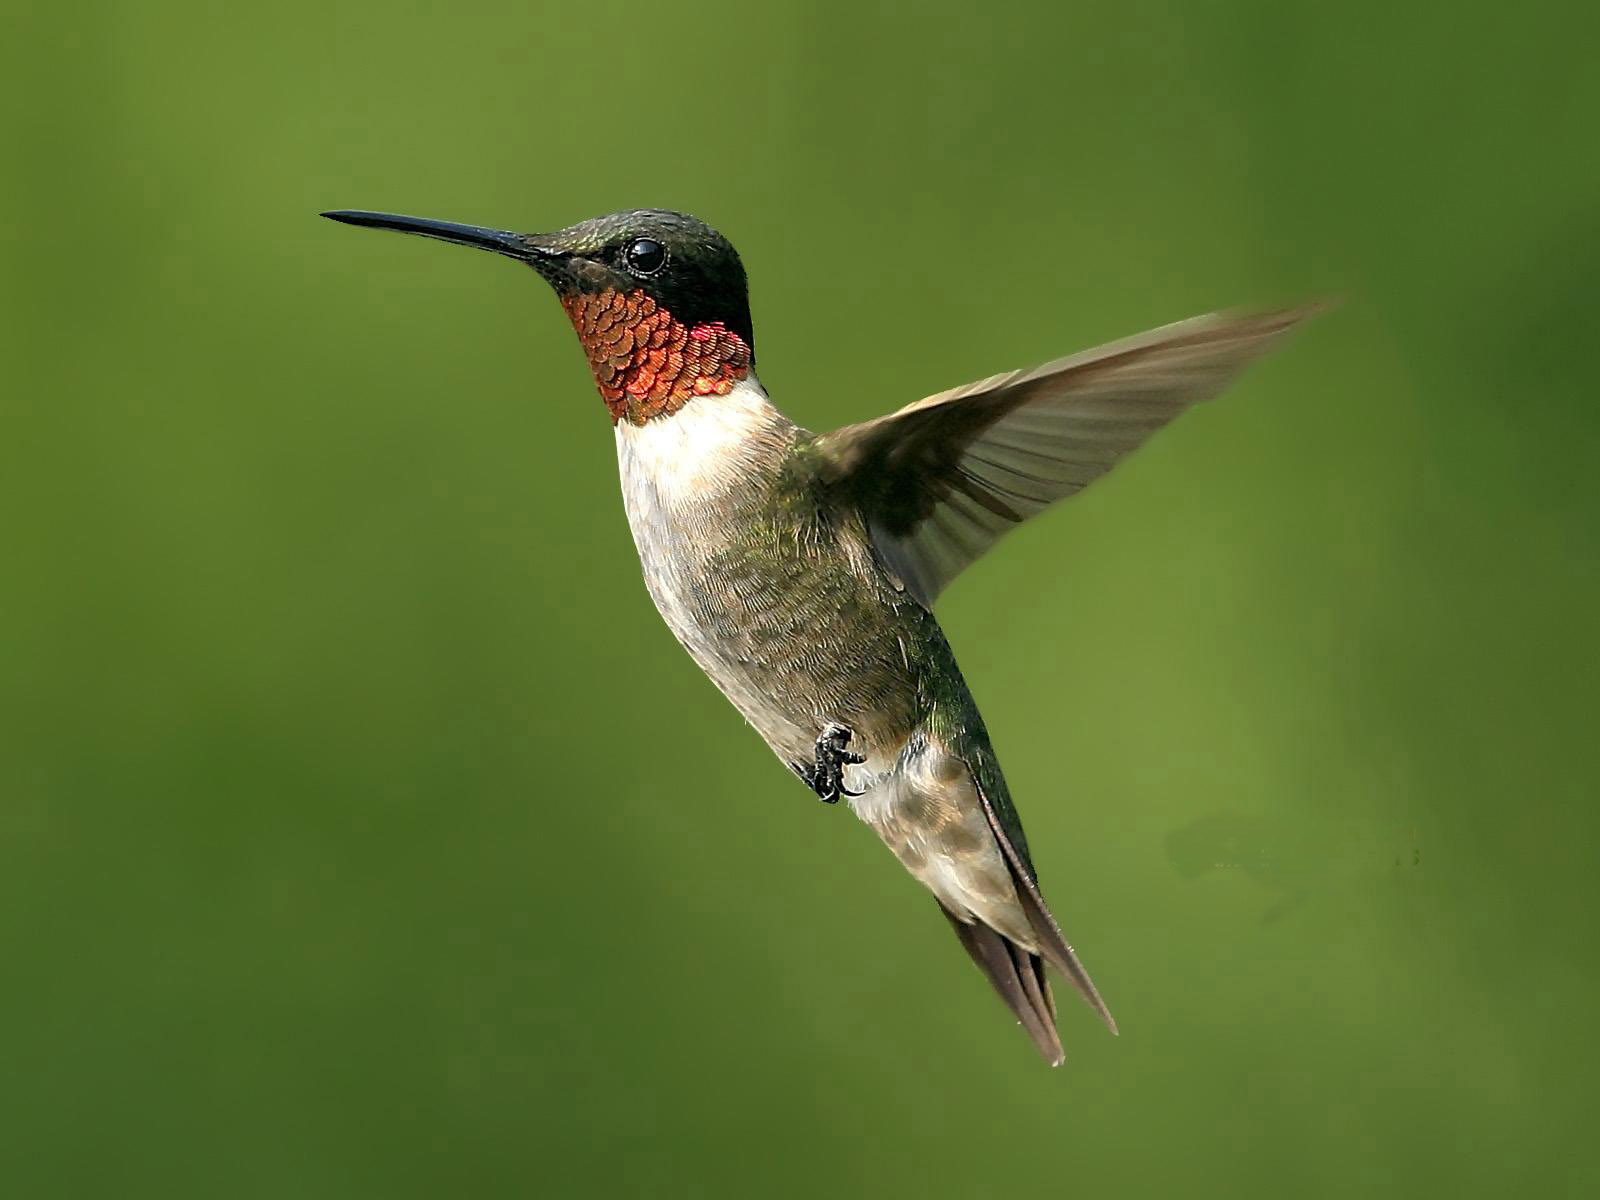 The Giant Hummingbird's wings beat at 8â10 beats per second, the ...